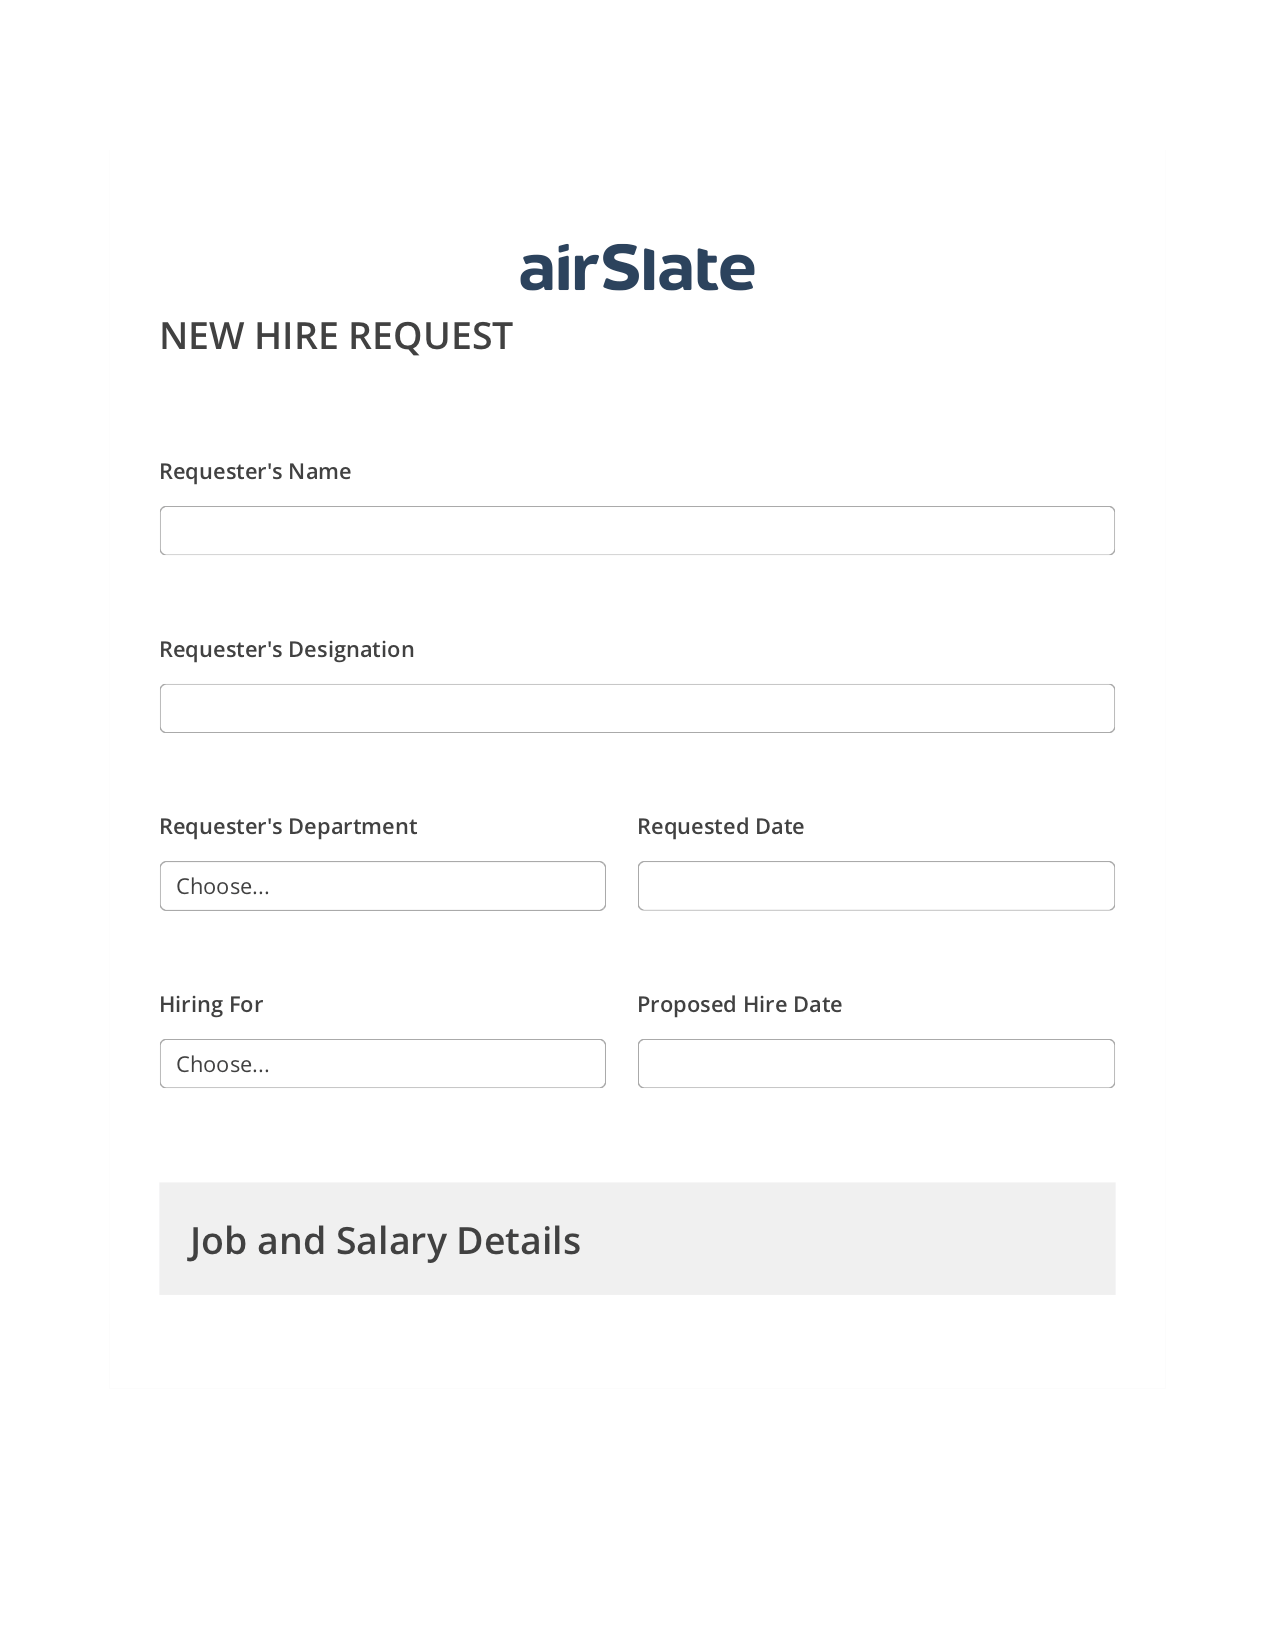 Hiring Request Workflow Prefill from NetSuite records, Set signature type addon, Export to Smartsheet